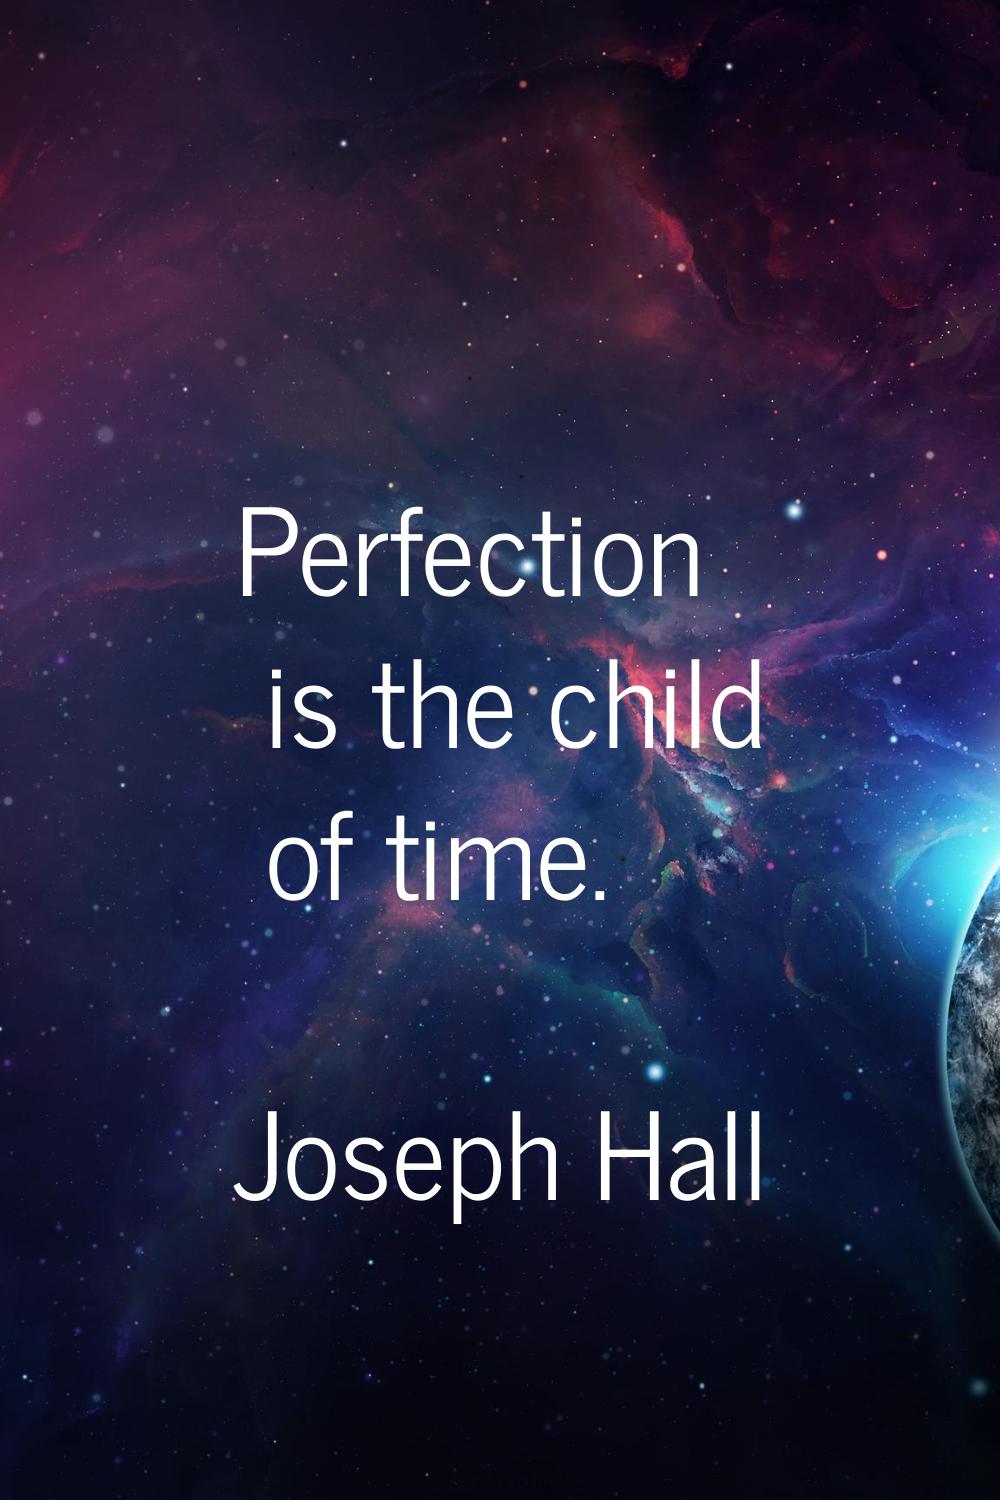 Perfection is the child of time.